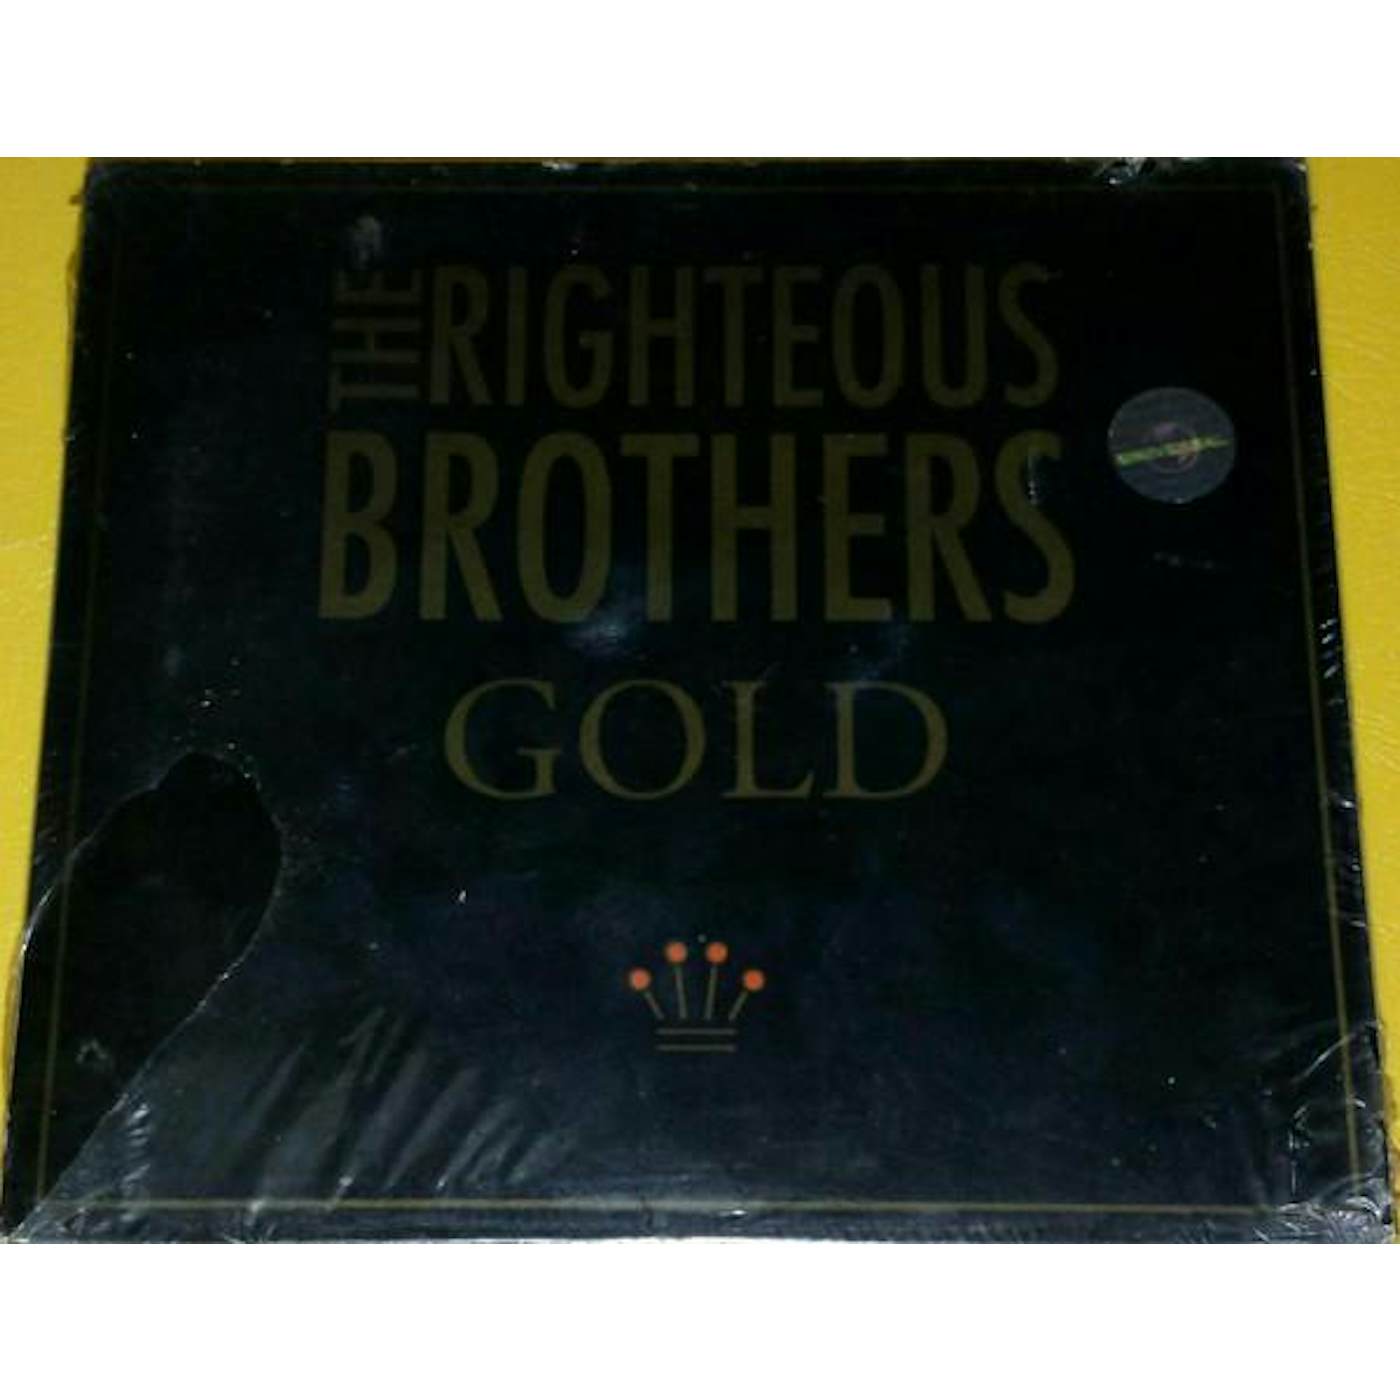 The Righteous Brothers GOLD CD